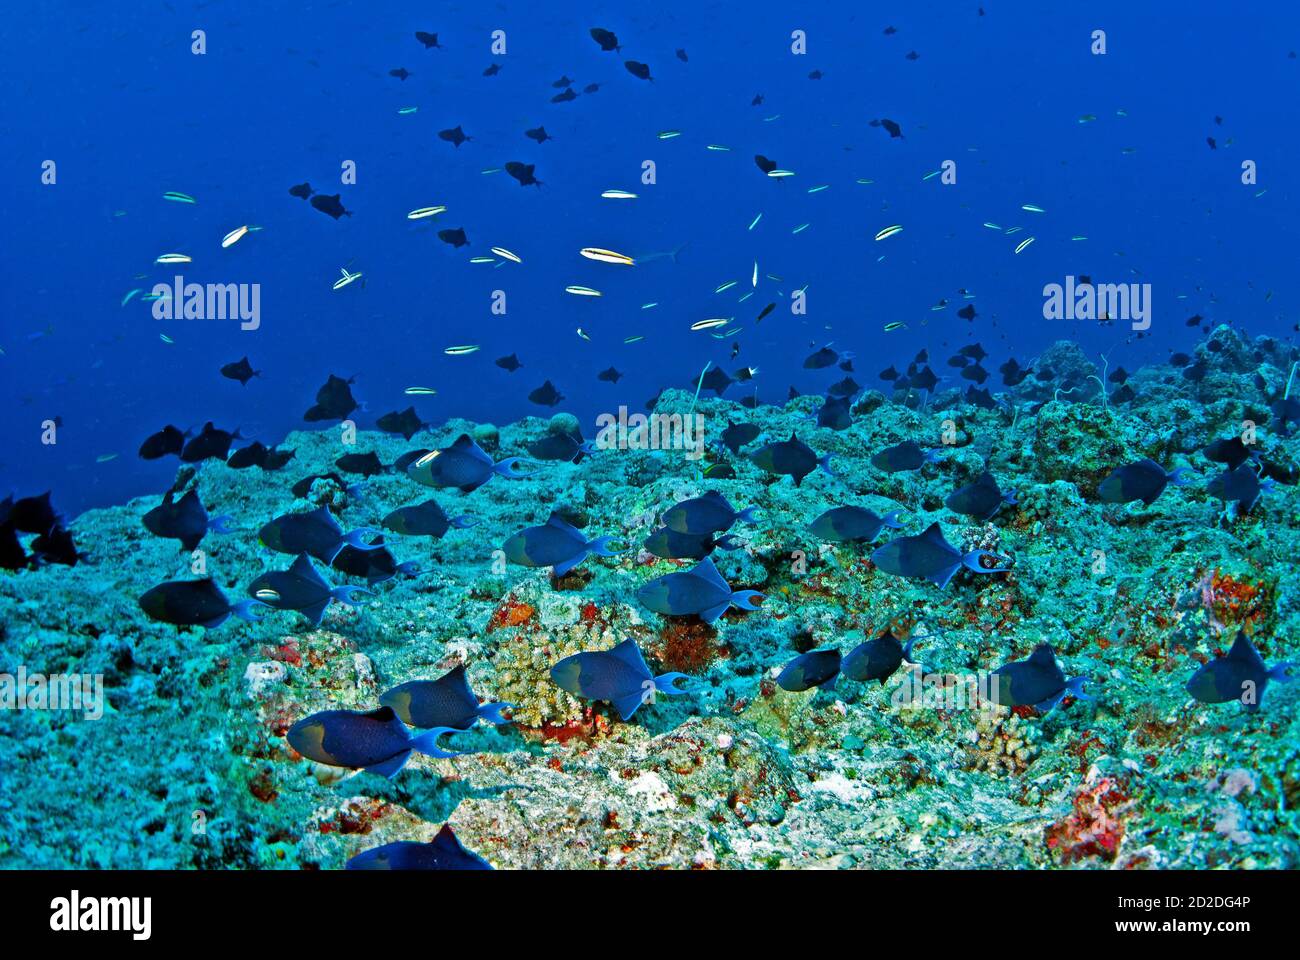 Large school of black triggerfish (Melichthys niger) swooping down on reef, Palau, Micronesia Stock Photo